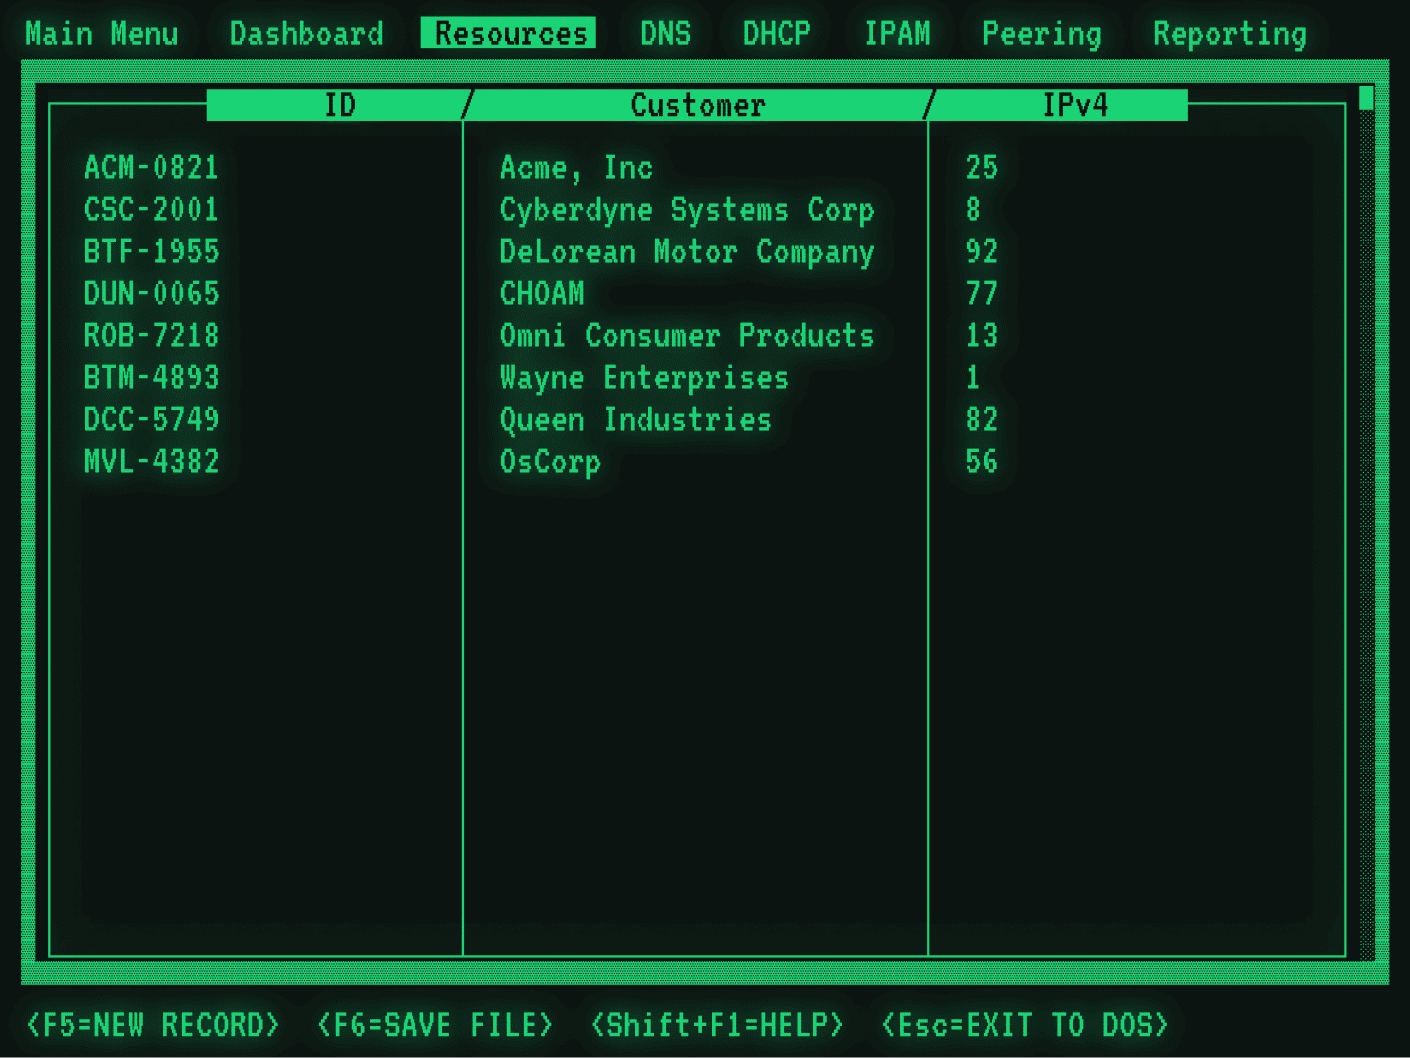 Resources screen in MS-DOS